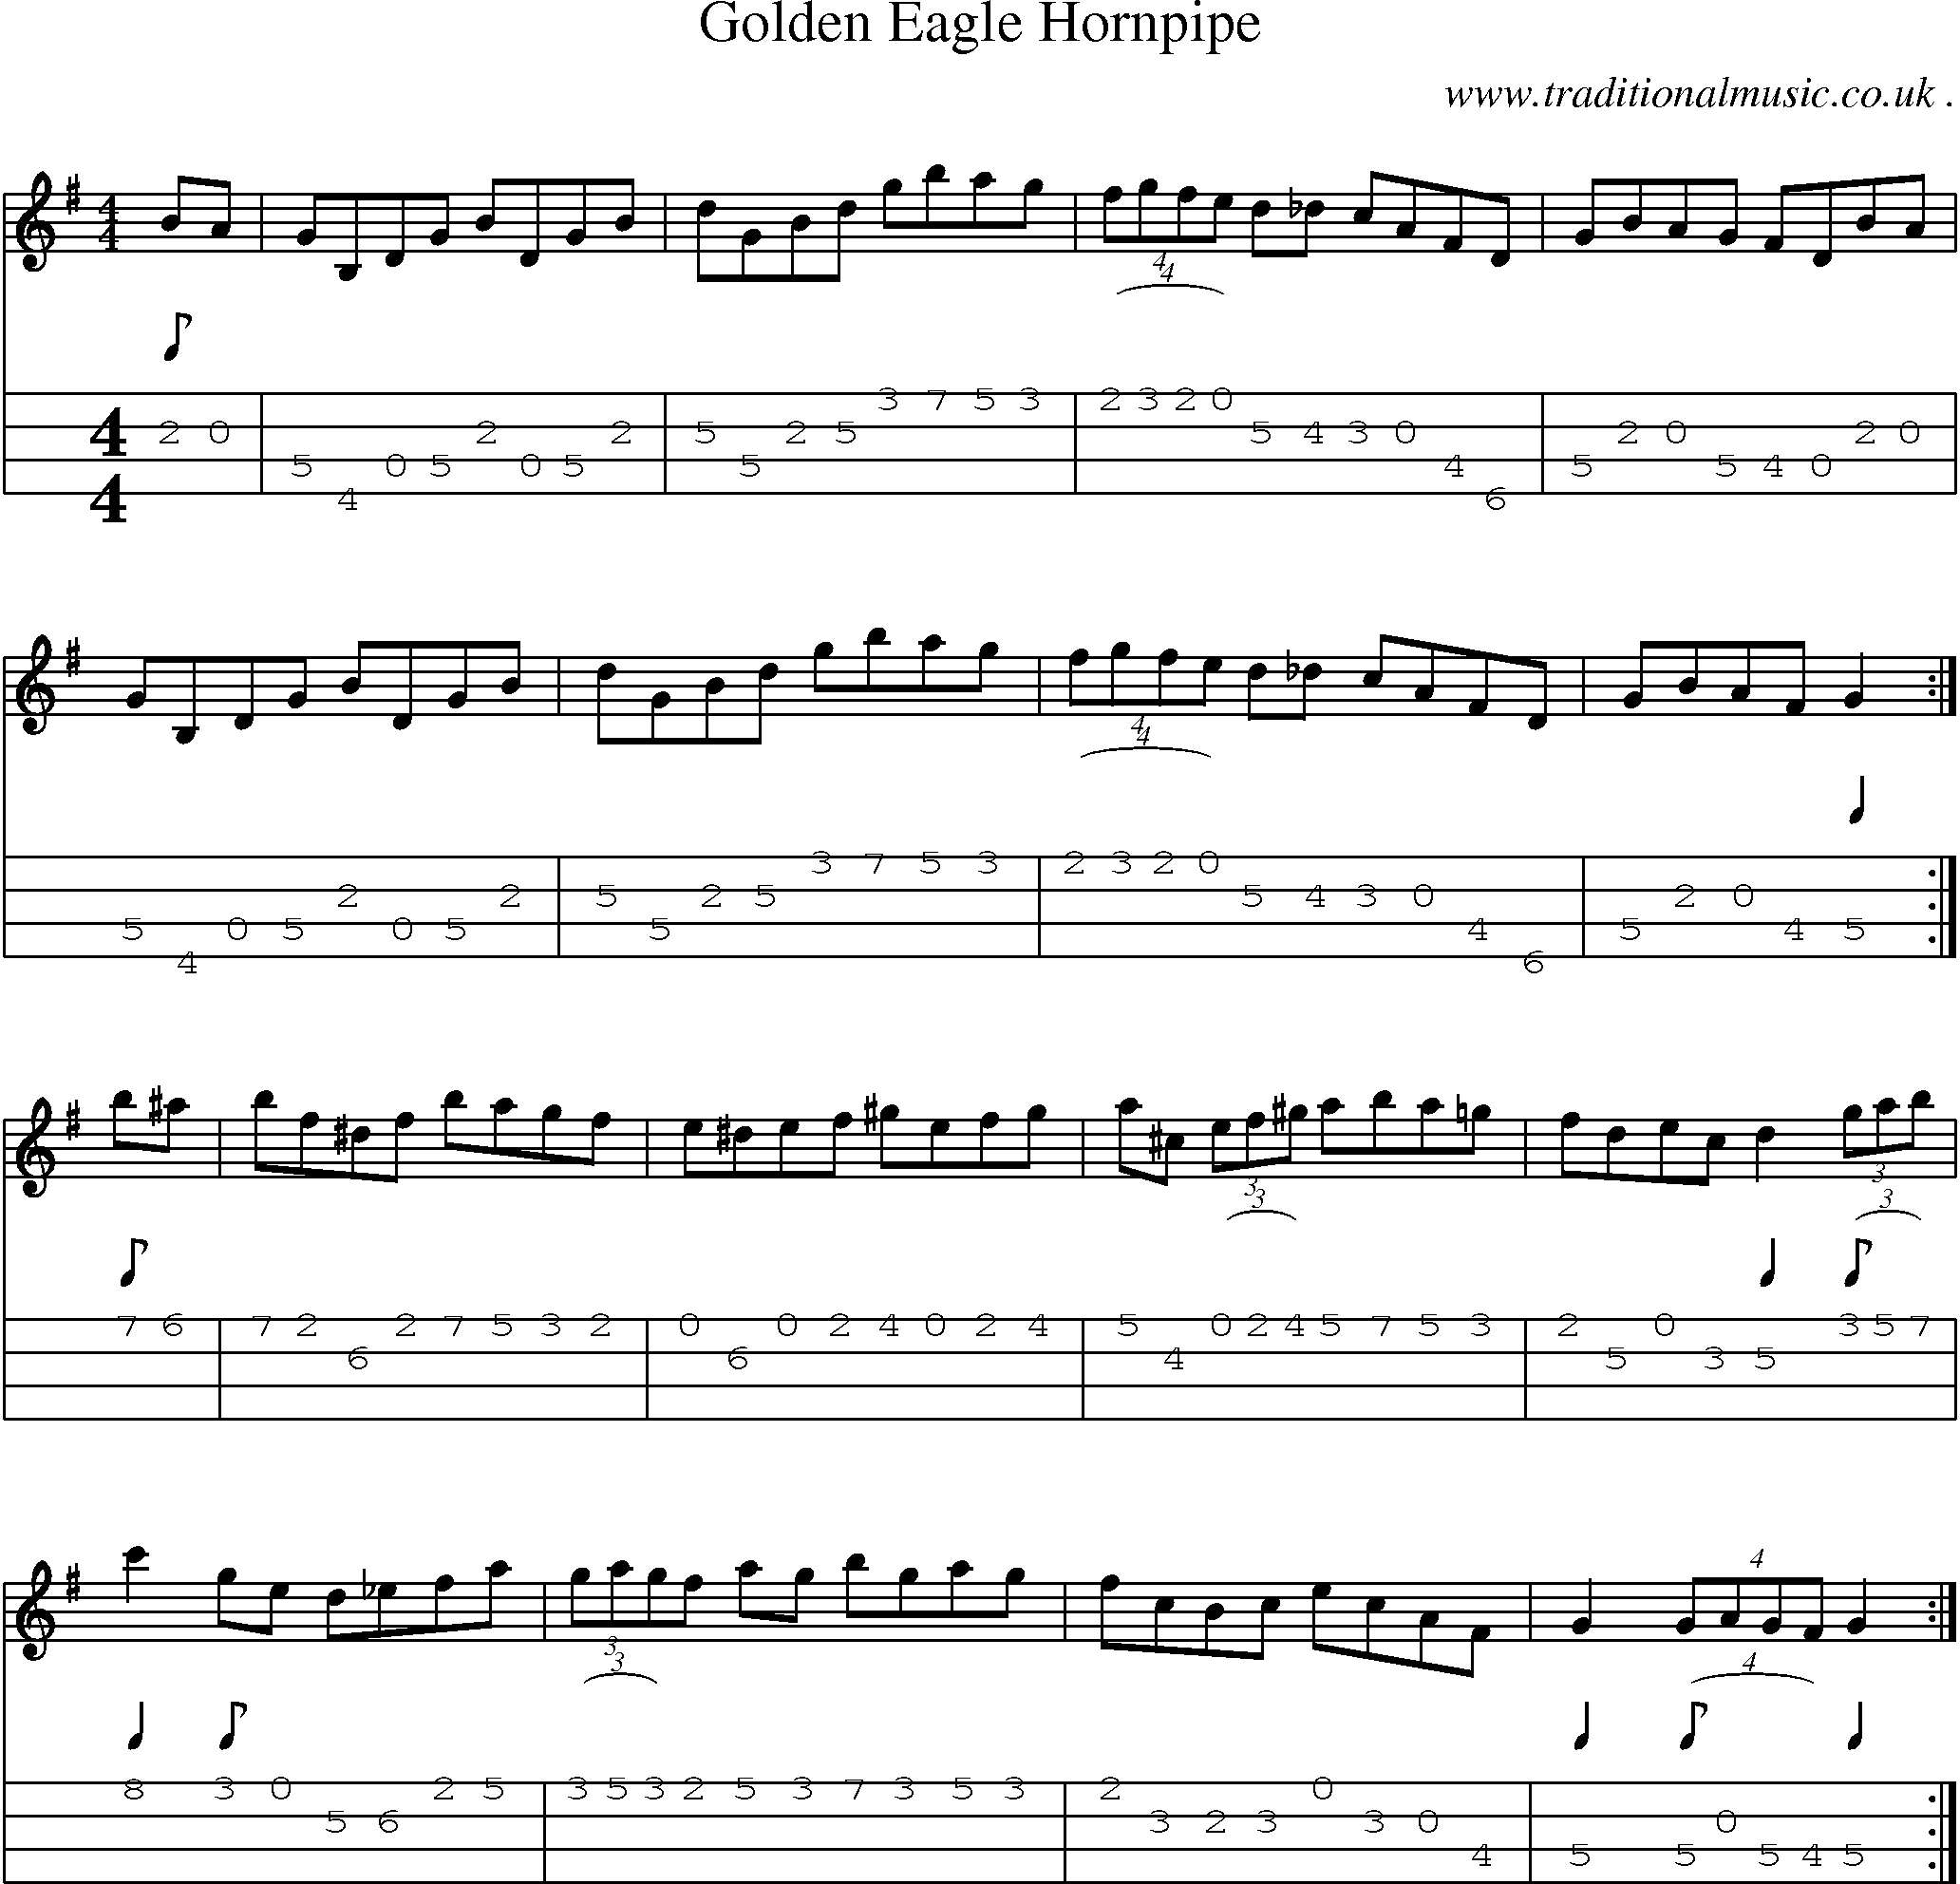 Music Score and Guitar Tabs for Golden Eagle Hornpipe